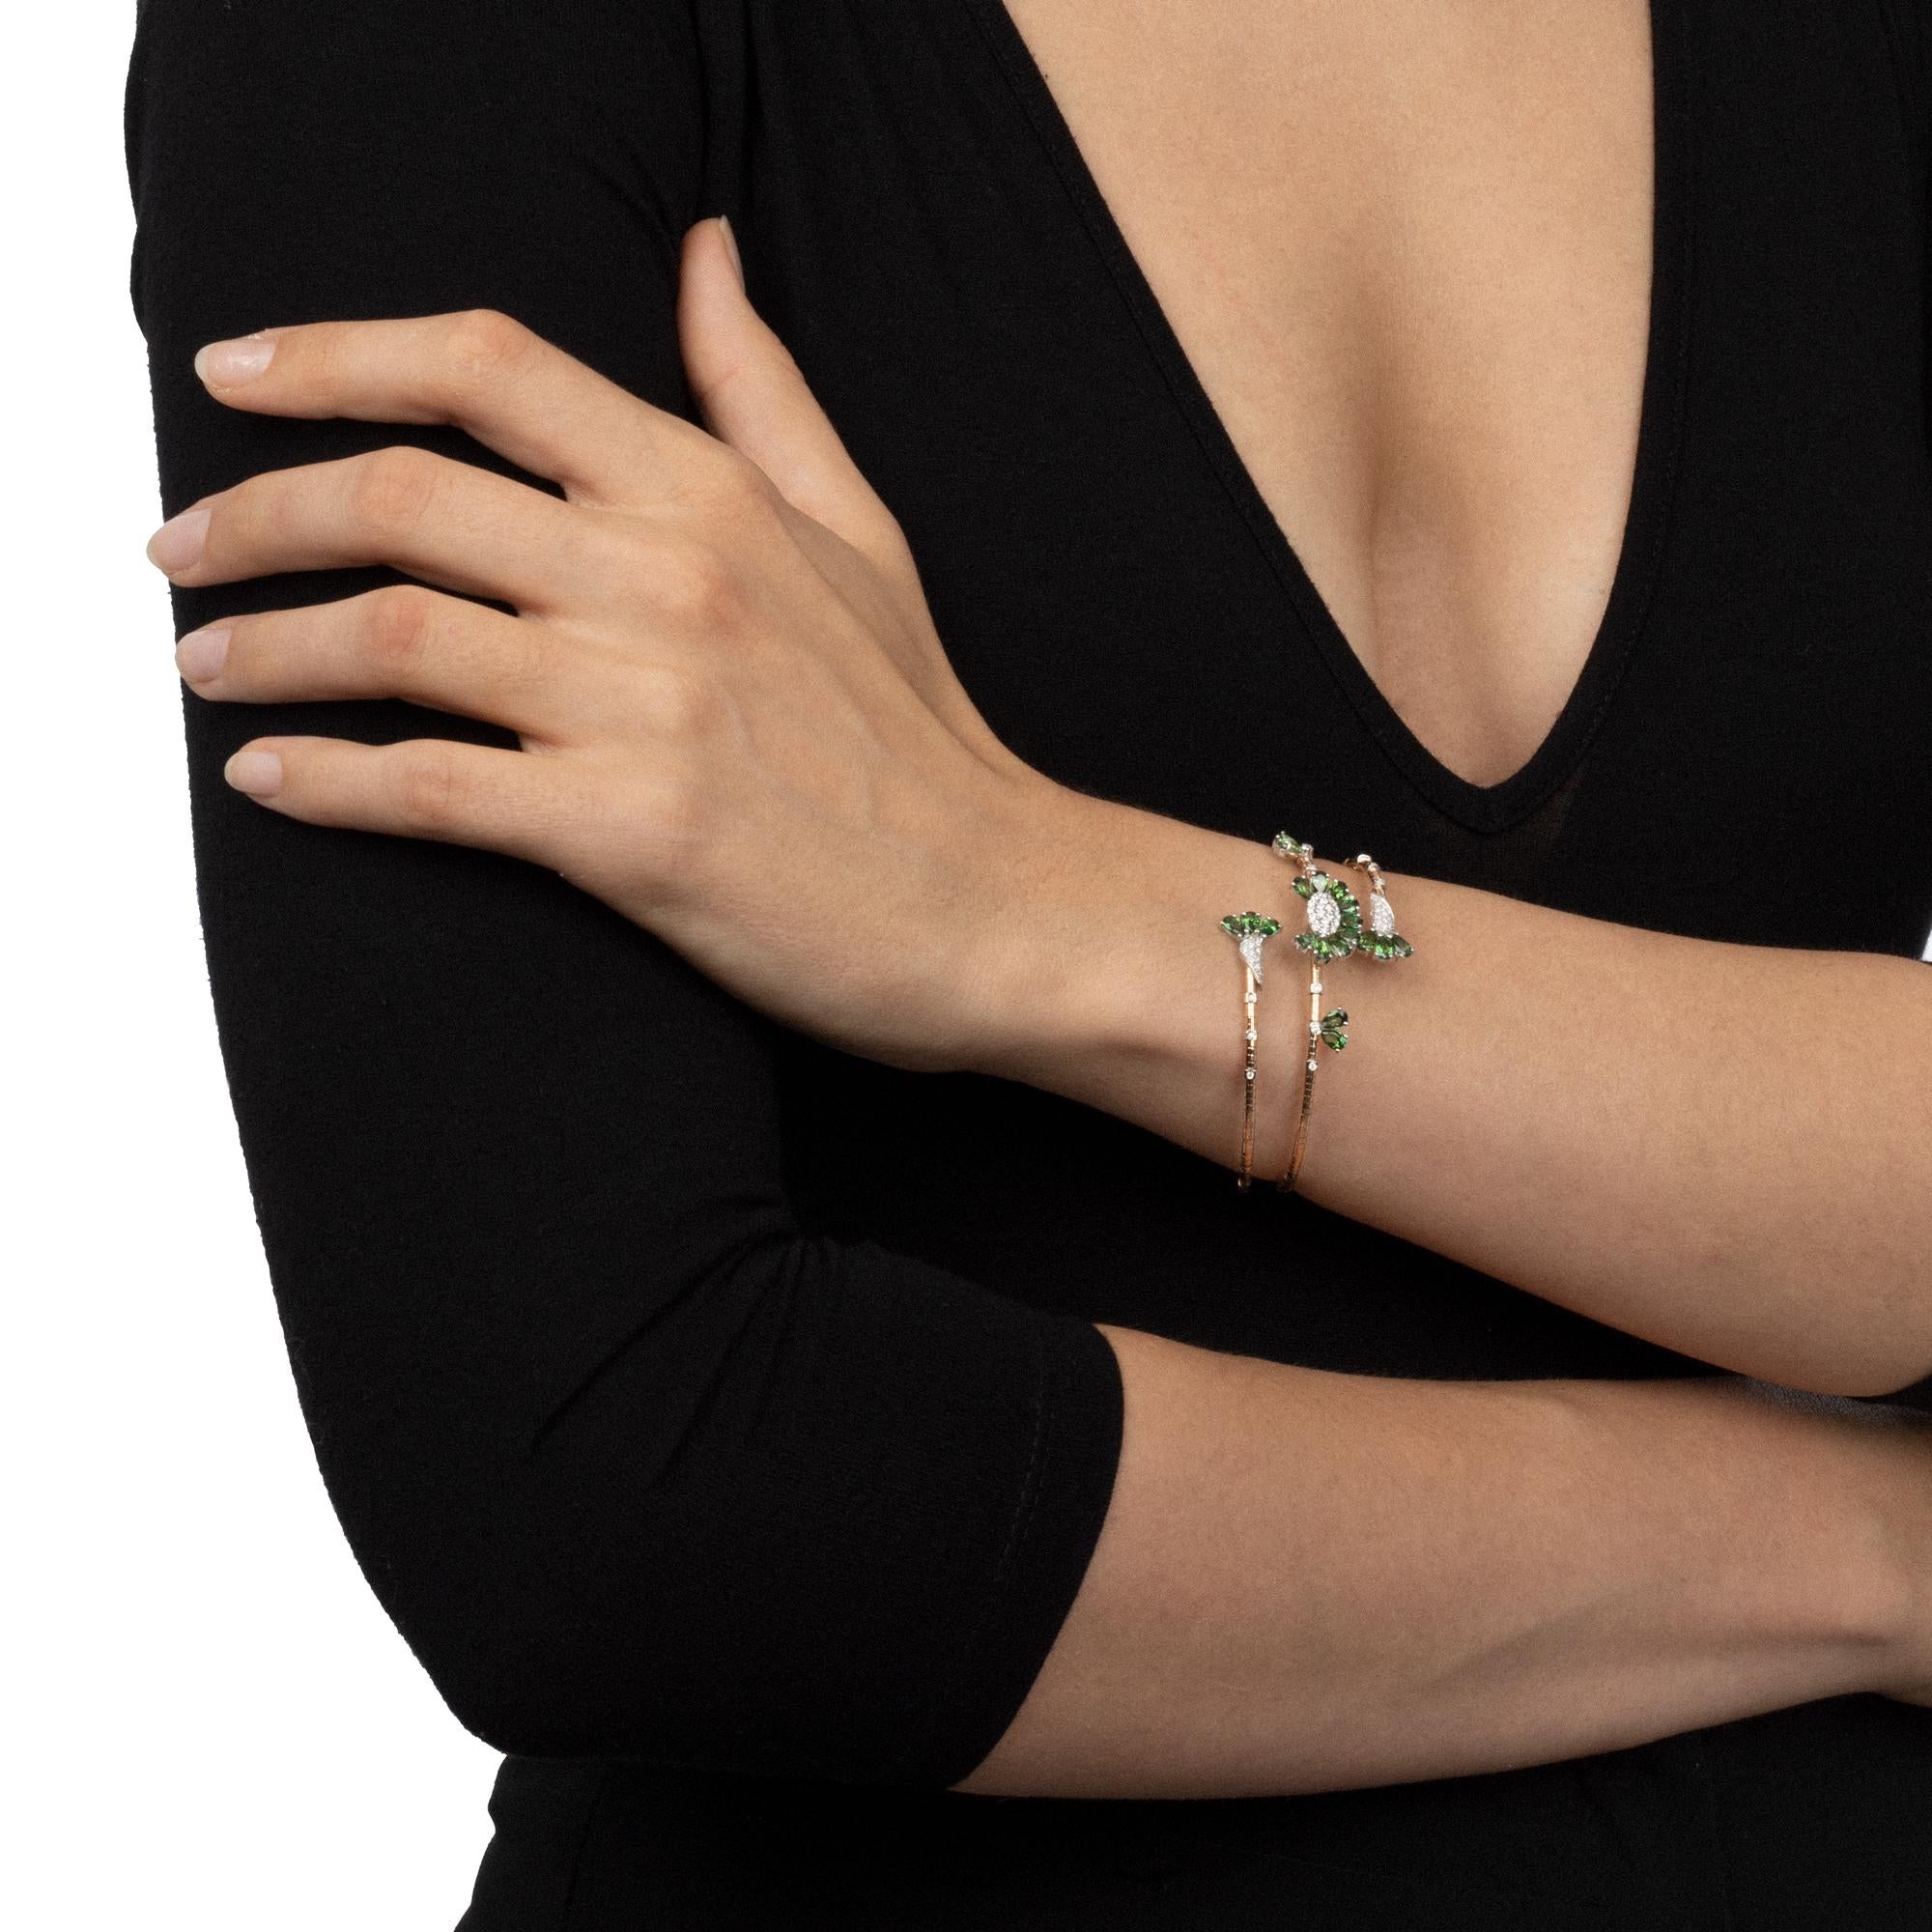 The spiral shape of this sophsiticated flex bracelet with a titanium core is designed to wrap gently around the wrist, catching and reflecting the light. The sophisticated elegance of green topaz gemstones is a celebration of italian feminine